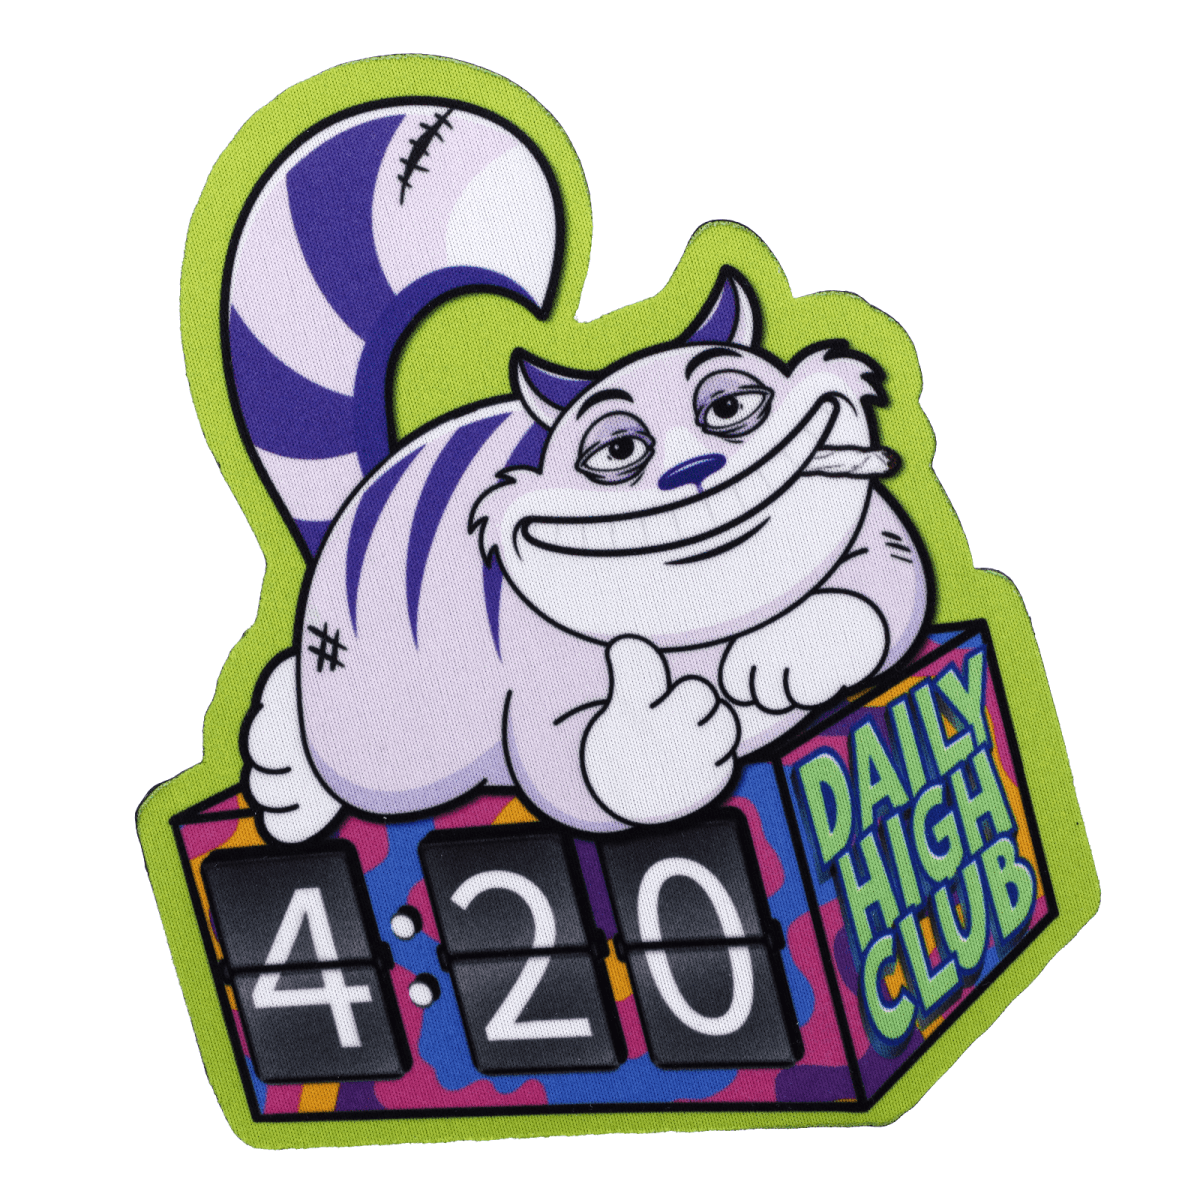 Daily High Club Dab Mat Cheshire Cat Dab Mat for April